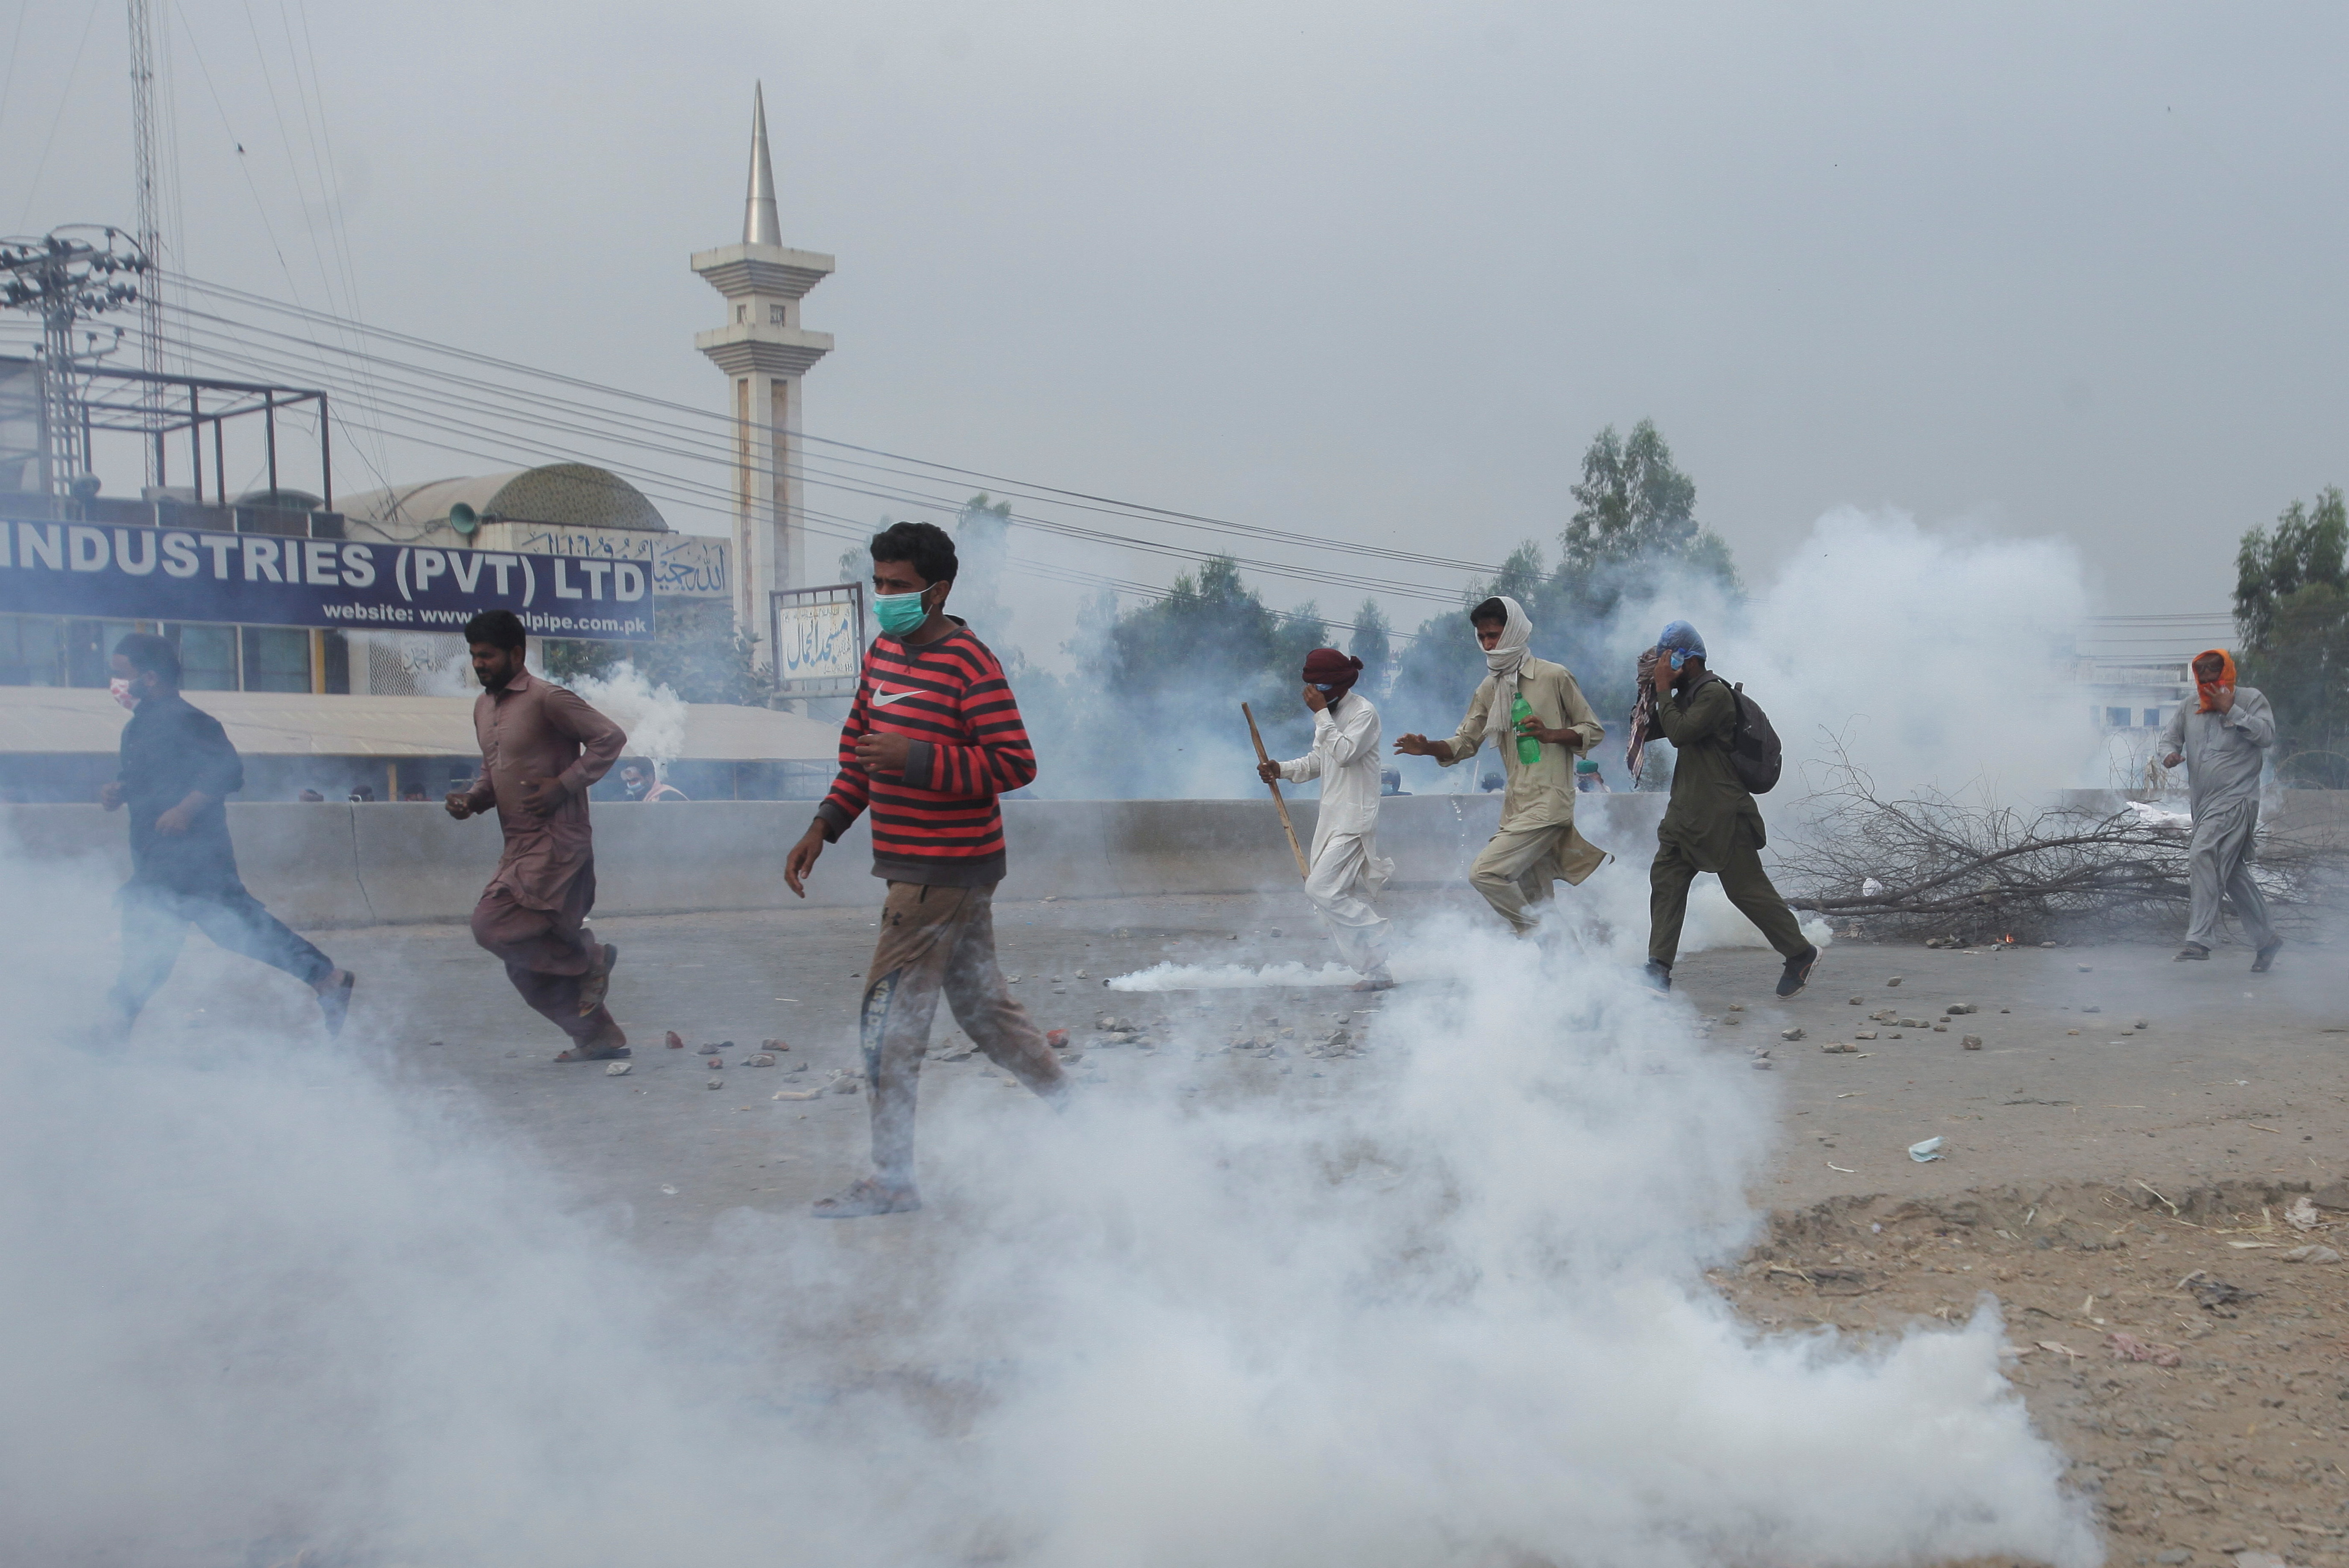 Supporters of the banned Islamist political party Tehrik-e-Labaik Pakistan (TLP) run amid the smoke of tear gas during a protest demanding the release of their leader and the expulsion of the French ambassador over cartoons depicting the Prophet Mohammad, in Lahore, Pakistan, October 23, 2021. REUTERS/Mohsin Raza/File Photo